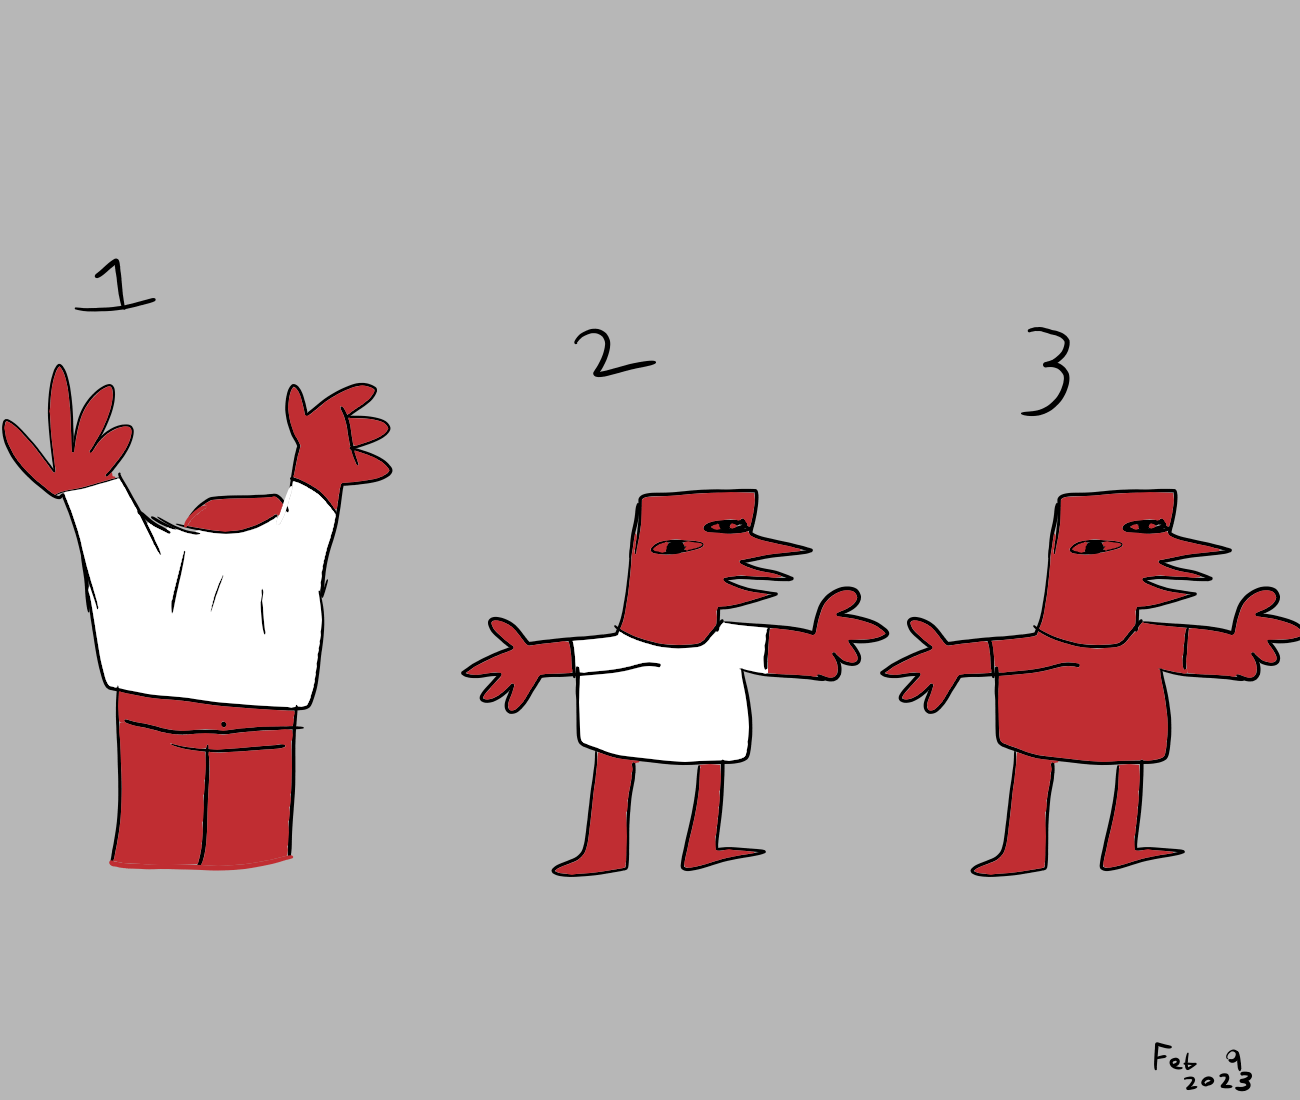 The red character now puts on the white shirt. The shirt turns from white to red.